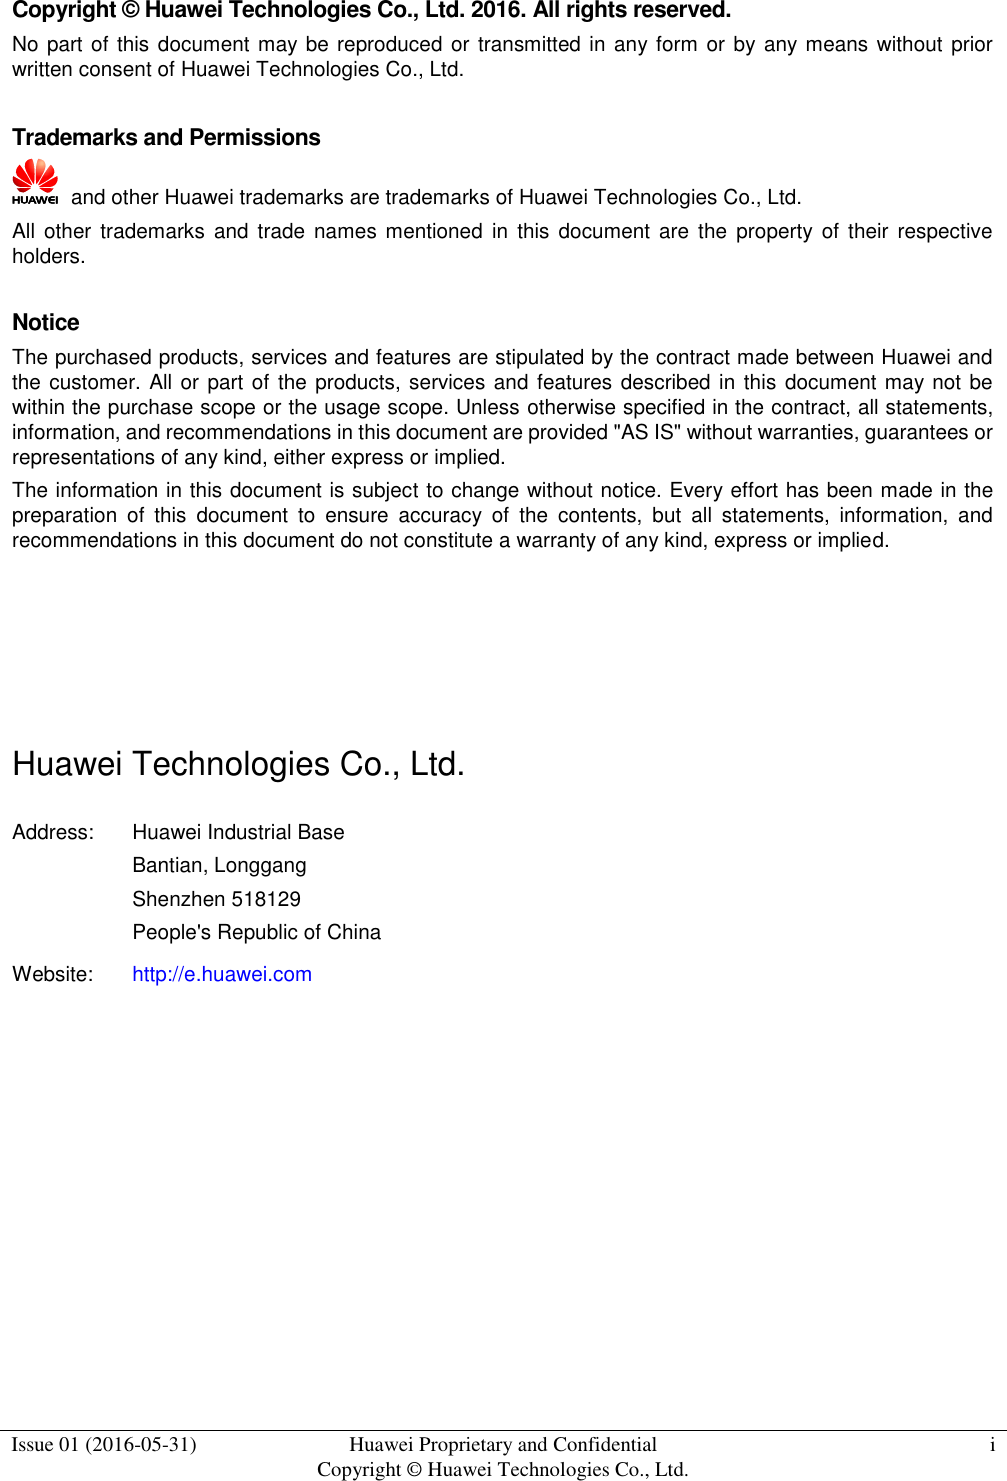  Issue 01 (2016-05-31) Huawei Proprietary and Confidential                                     Copyright © Huawei Technologies Co., Ltd. i    Copyright © Huawei Technologies Co., Ltd. 2016. All rights reserved. No part of this document may be reproduced or transmitted in any form or by any means without  prior written consent of Huawei Technologies Co., Ltd.  Trademarks and Permissions   and other Huawei trademarks are trademarks of Huawei Technologies Co., Ltd. All other trademarks and  trade  names  mentioned  in  this  document are  the  property  of  their respective holders.  Notice The purchased products, services and features are stipulated by the contract made between Huawei and the customer.  All or part of the products, services and features described in this  document may not be within the purchase scope or the usage scope. Unless otherwise specified in the contract, all statements, information, and recommendations in this document are provided &quot;AS IS&quot; without warranties, guarantees or representations of any kind, either express or implied. The information in this document is subject to change without notice. Every effort has been made in the preparation  of  this  document  to  ensure  accuracy  of  the  contents,  but  all  statements,  information,  and recommendations in this document do not constitute a warranty of any kind, express or implied.     Huawei Technologies Co., Ltd. Address: Huawei Industrial Base Bantian, Longgang Shenzhen 518129 People&apos;s Republic of China Website: http://e.huawei.com          